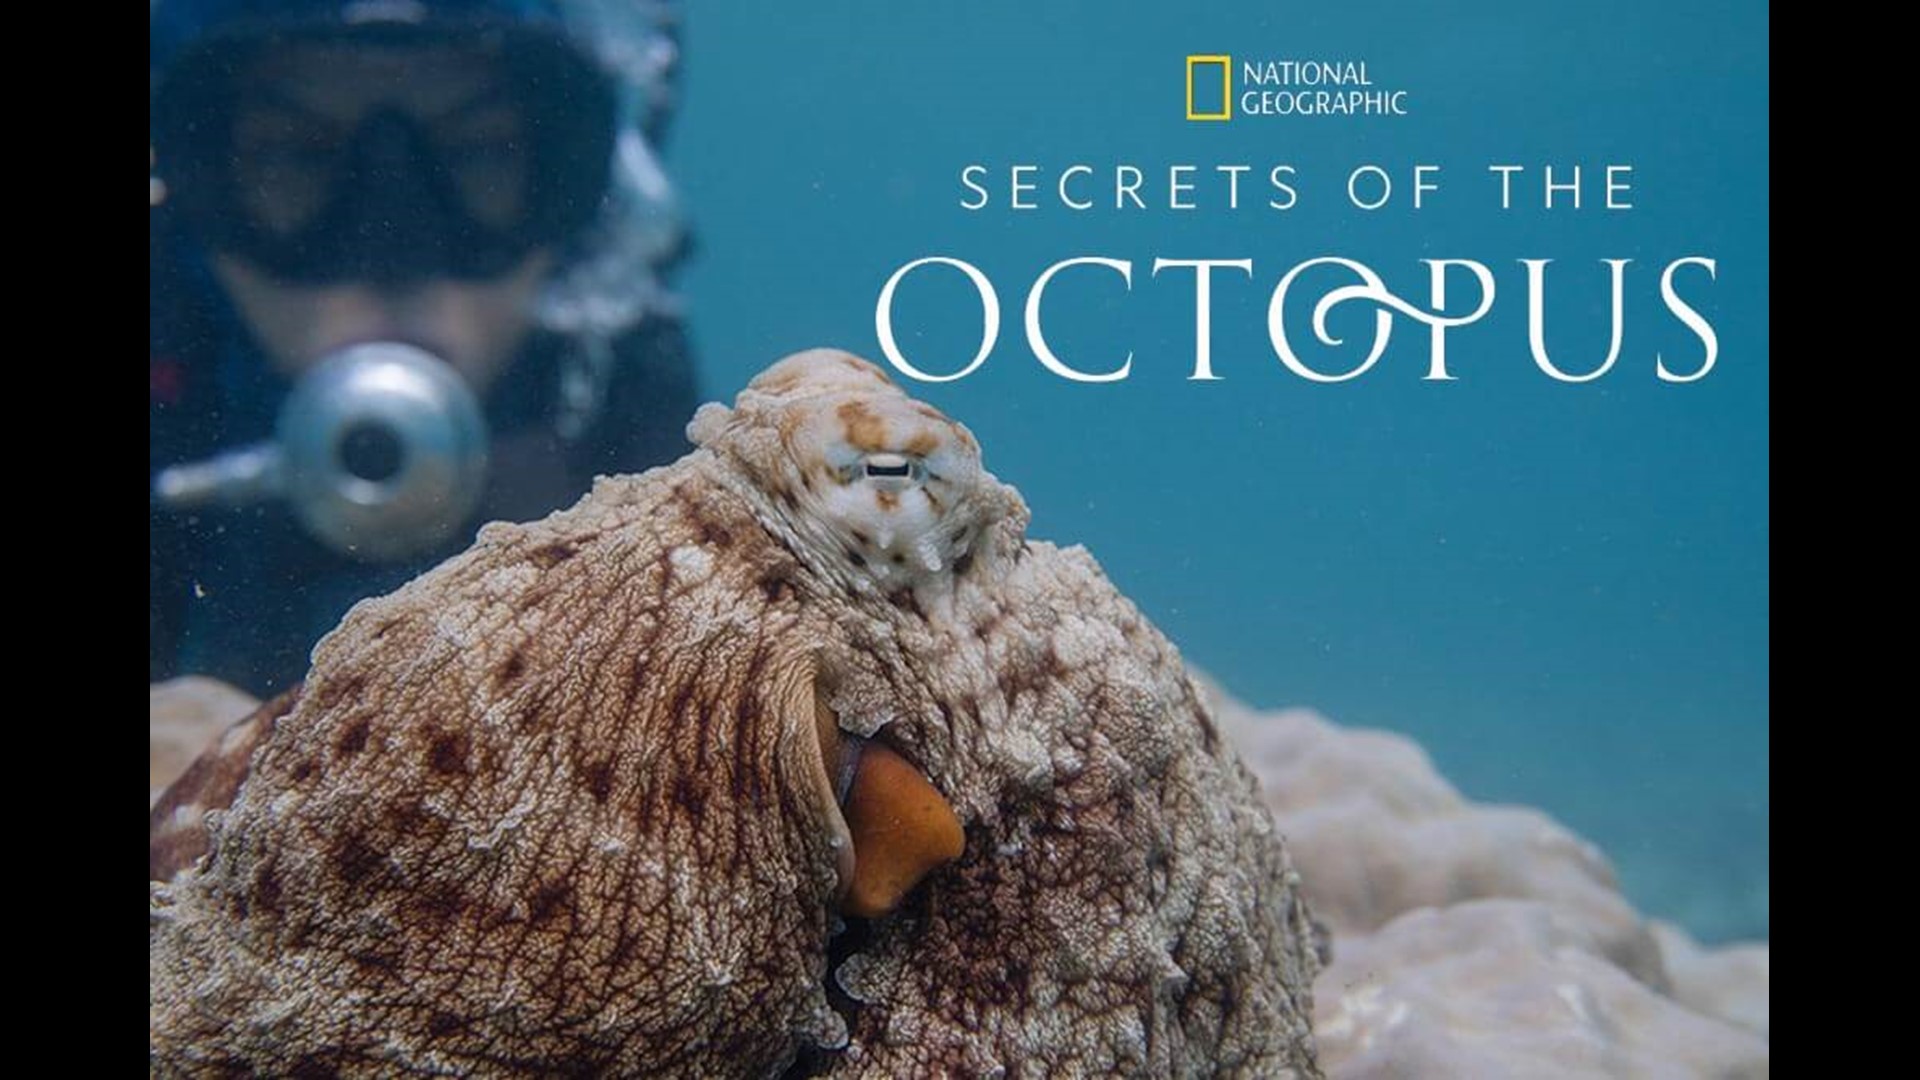 Octopuses are having a moment after the recent Oscar-winning "My Octopus Teacher" from Craig Foster. Now comes Nat Geo's latest "Secrets Of."